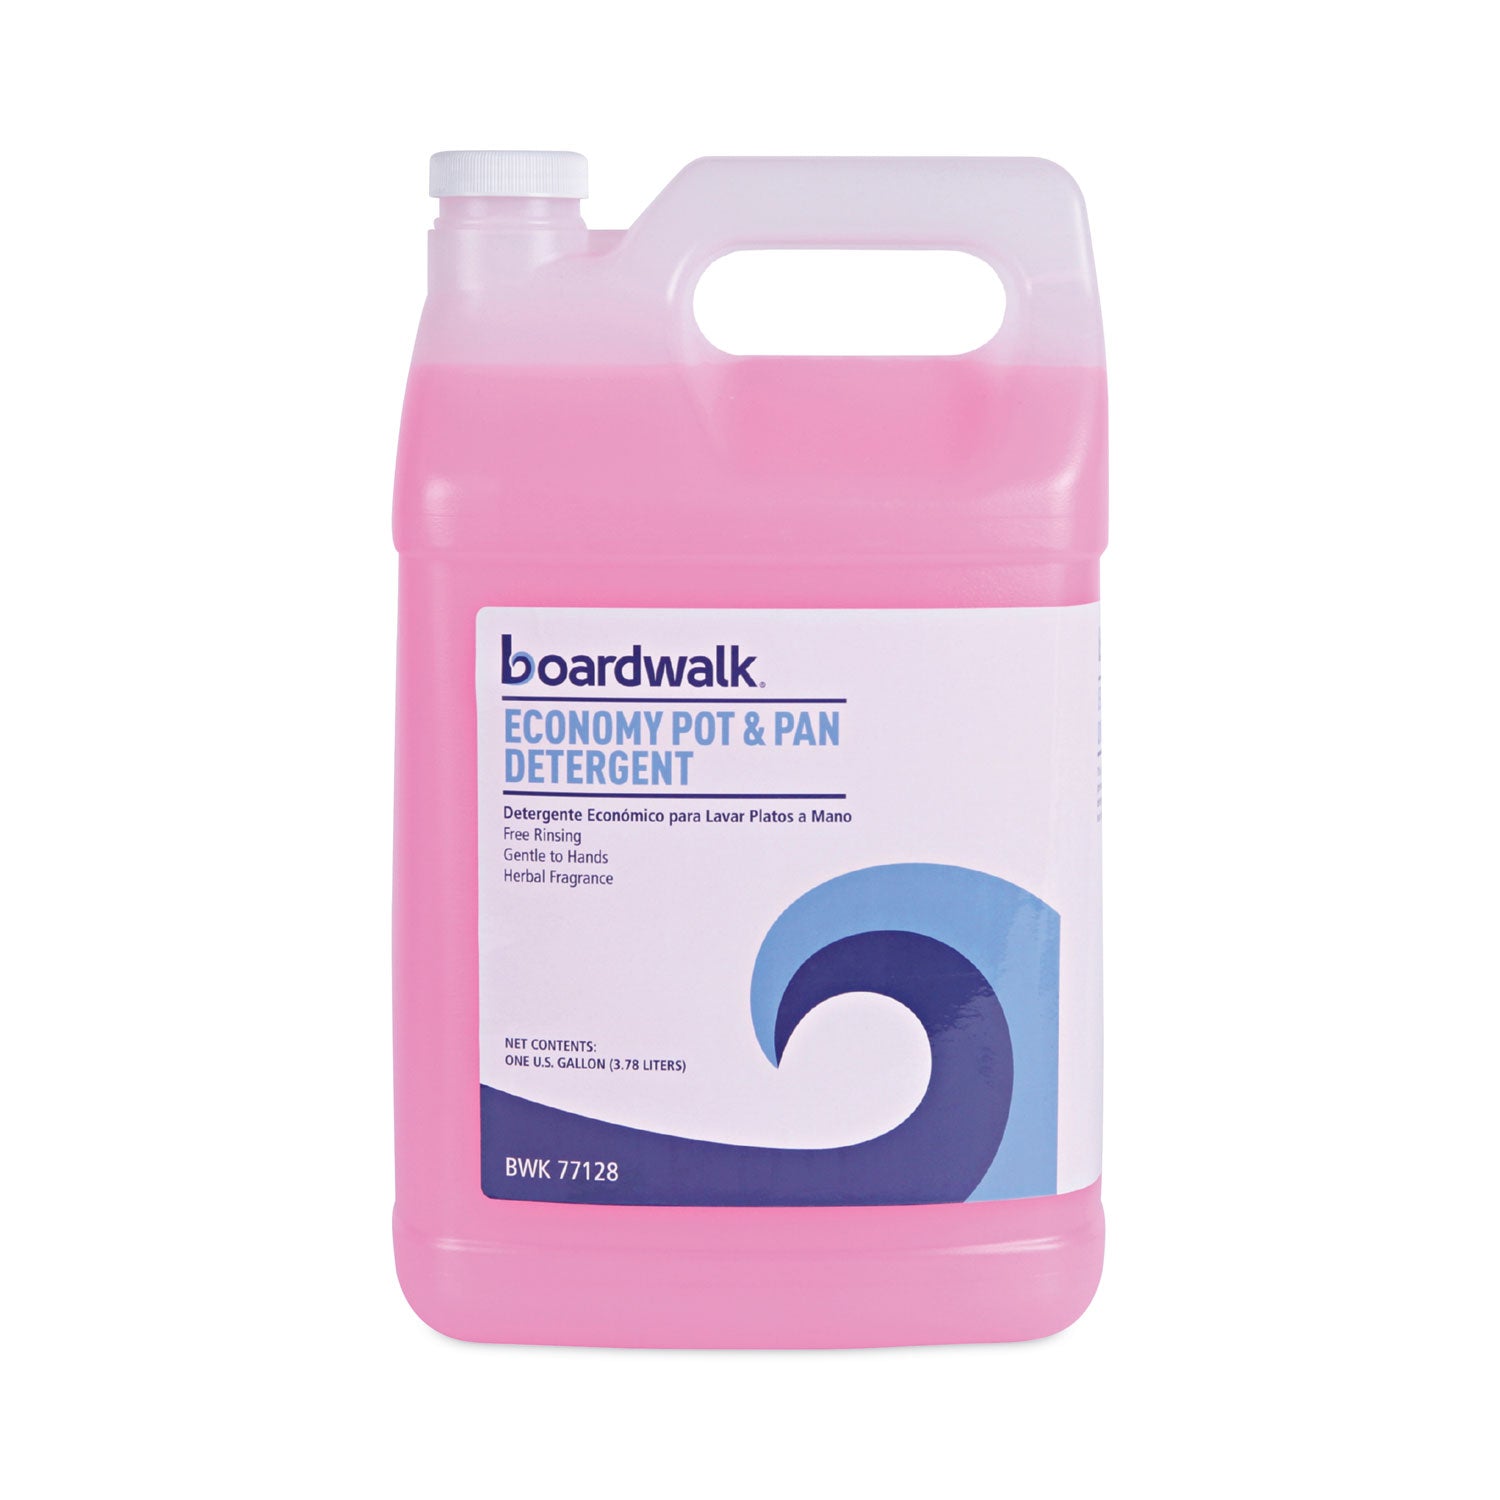 industrial-strength-pot-and-pan-detergent-1-gal-bottle_bwk77128ea - 1